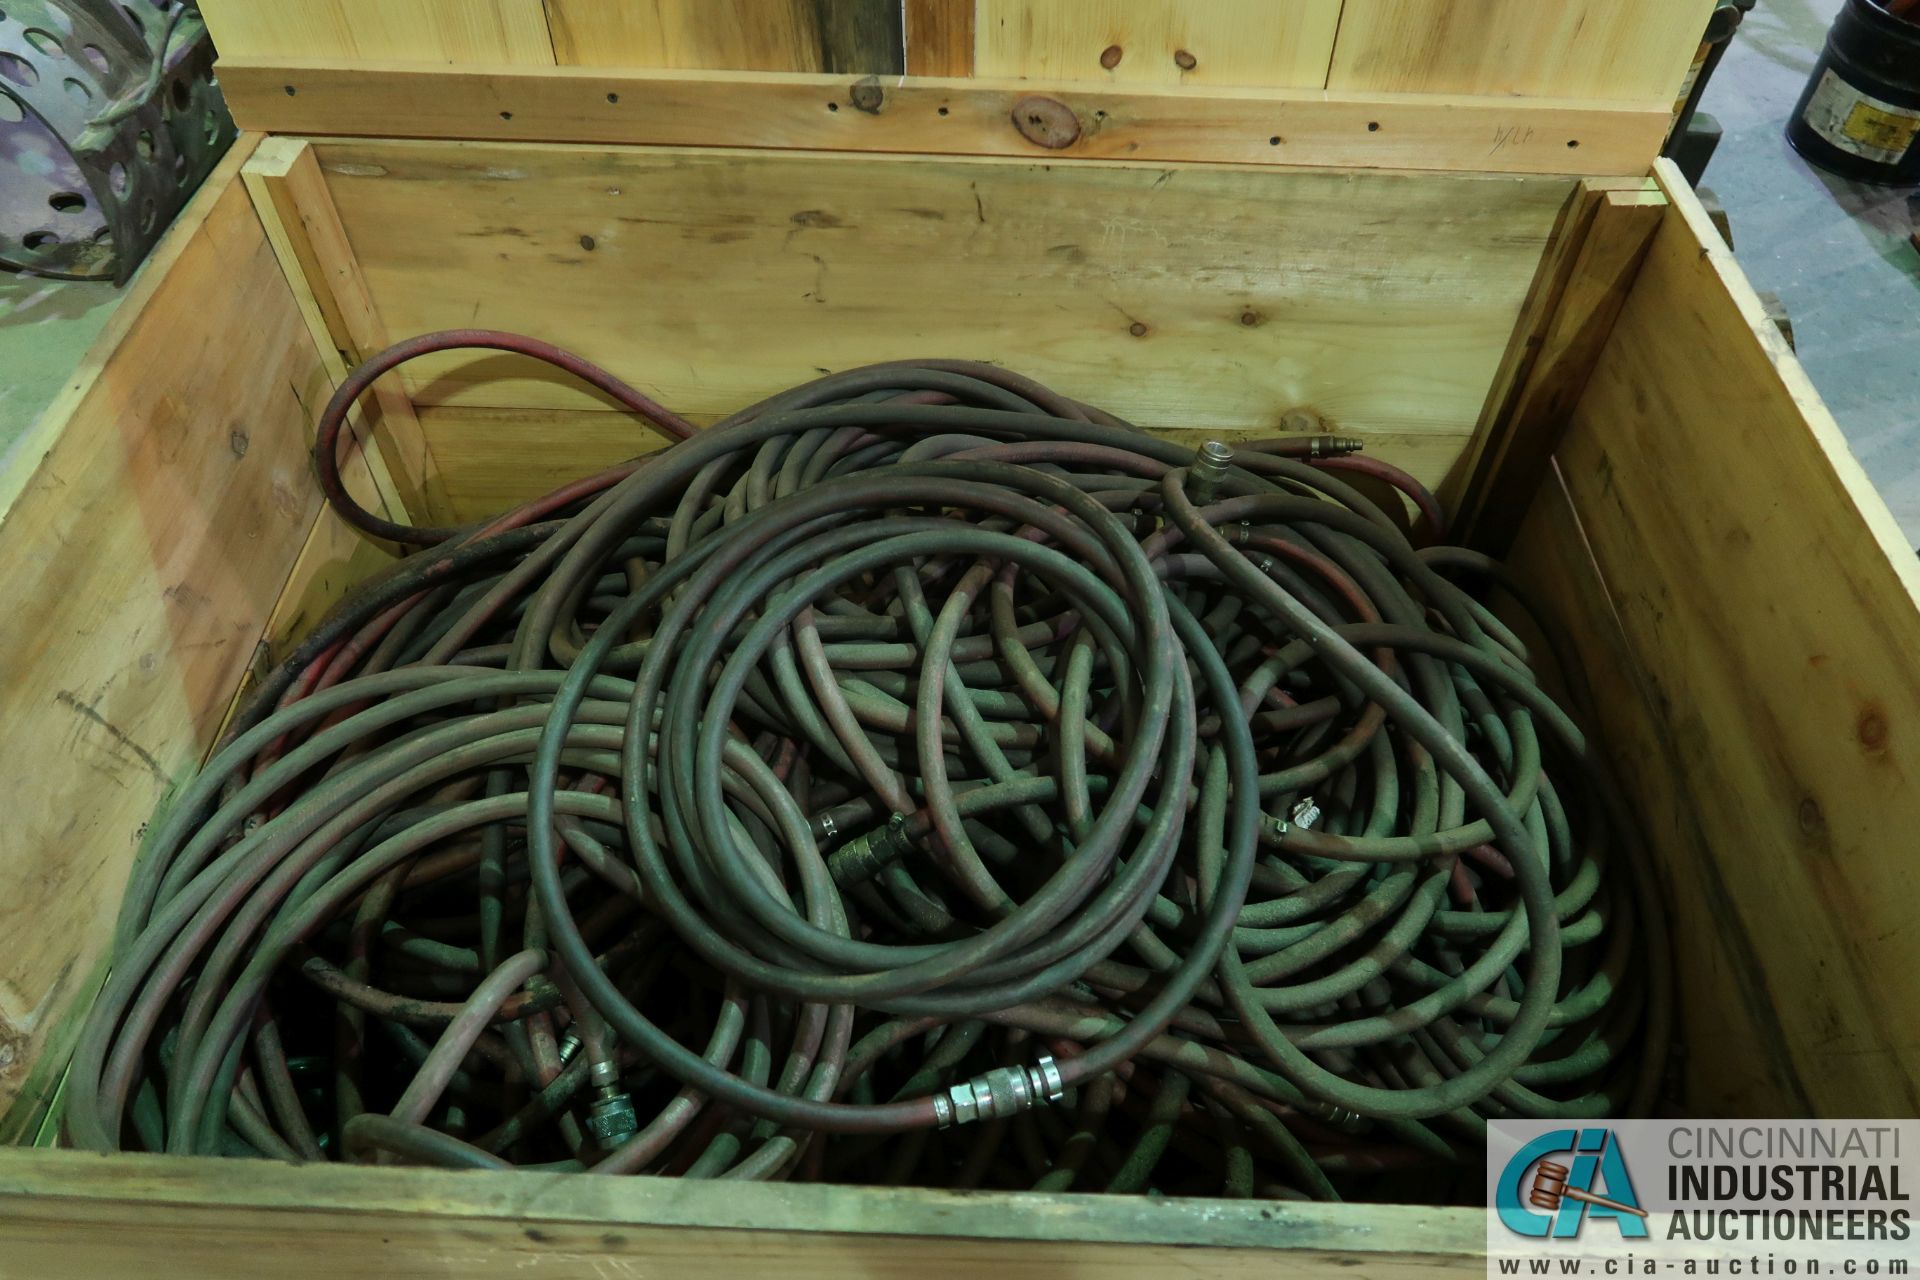 WOOD CRATE MISCELLANEOUS AIR HOSE